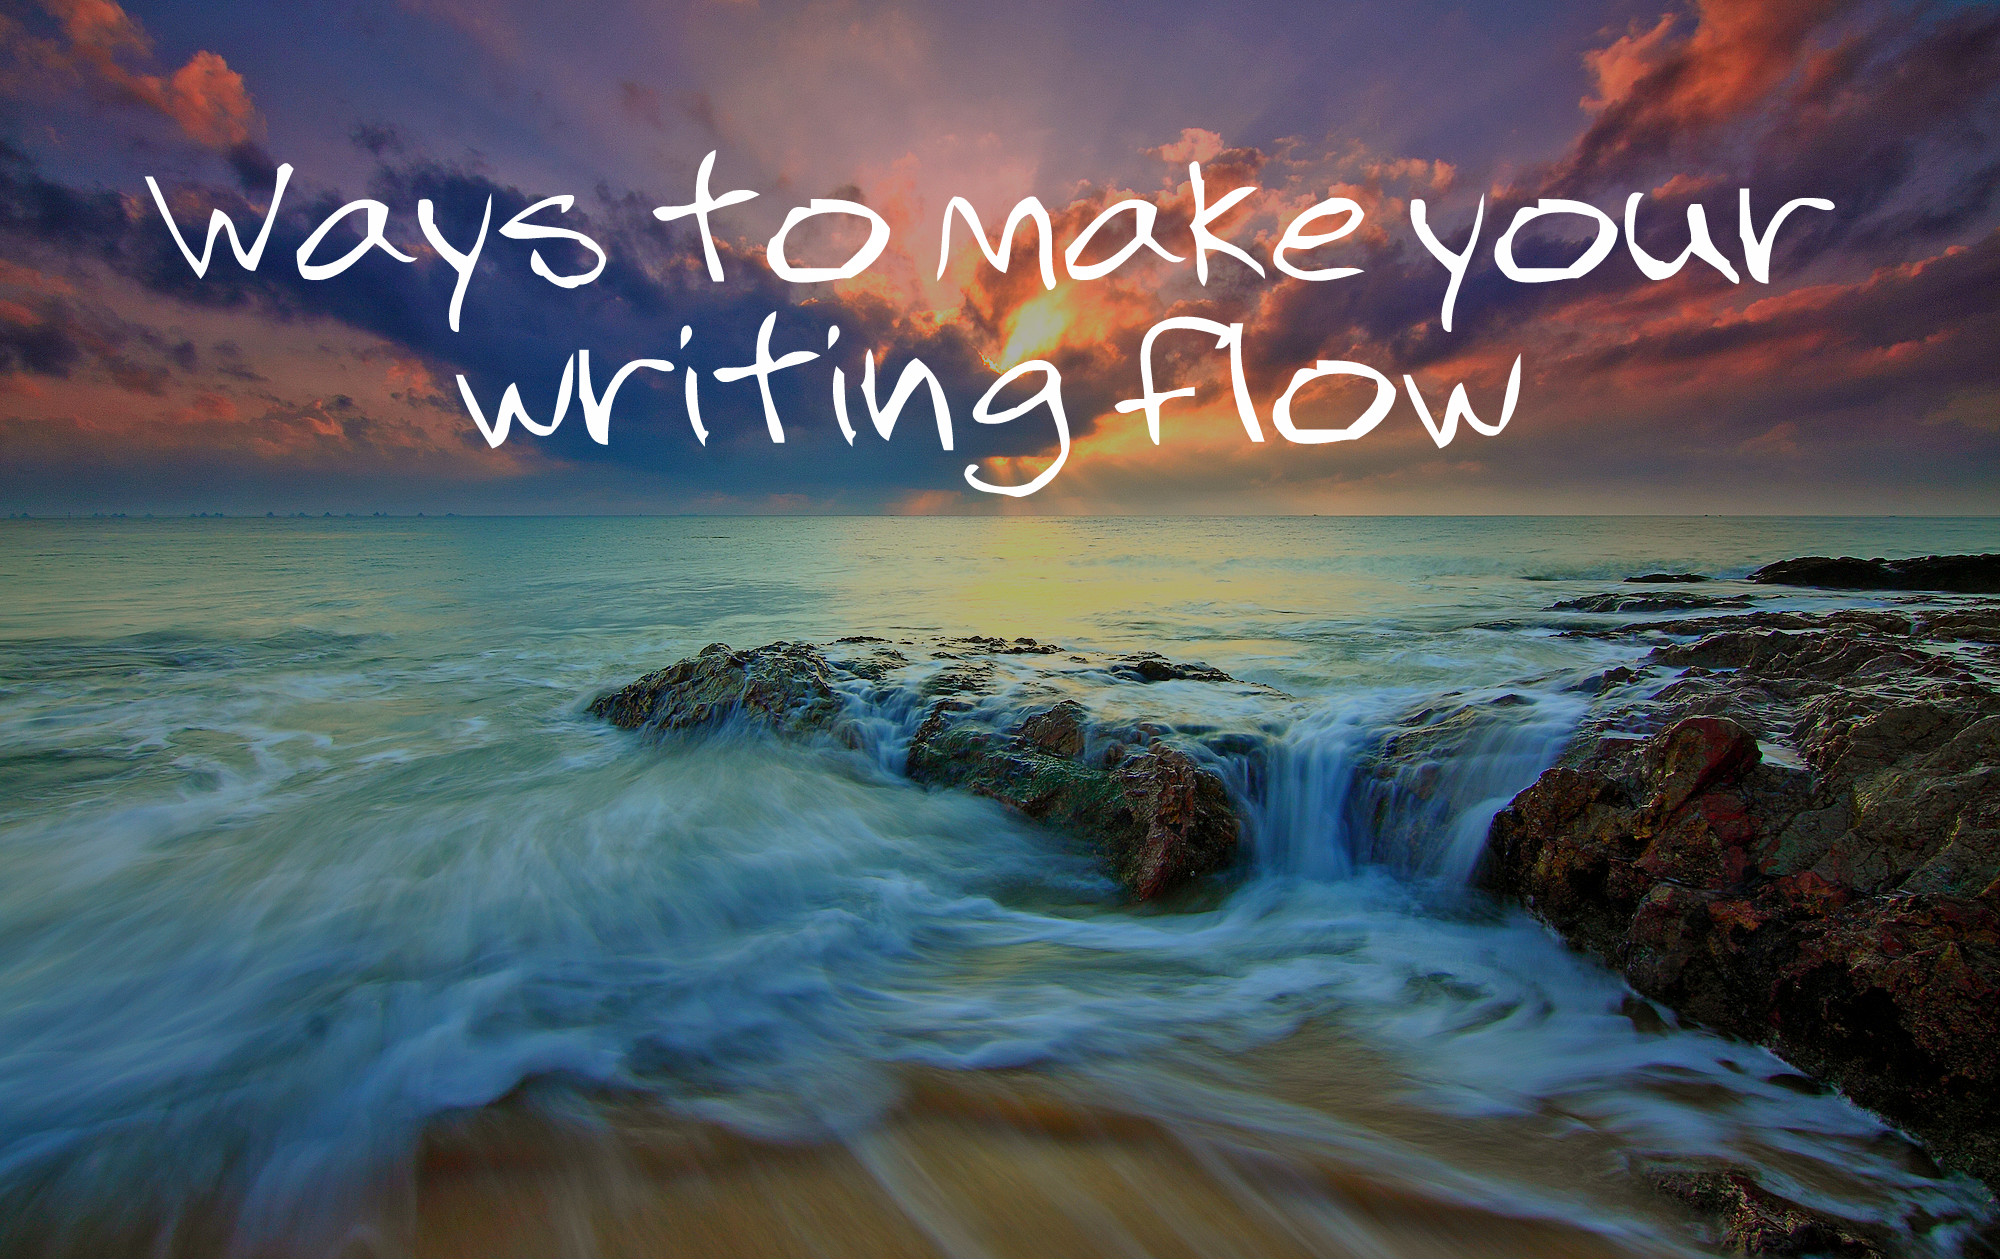 Ways to make your writing flow